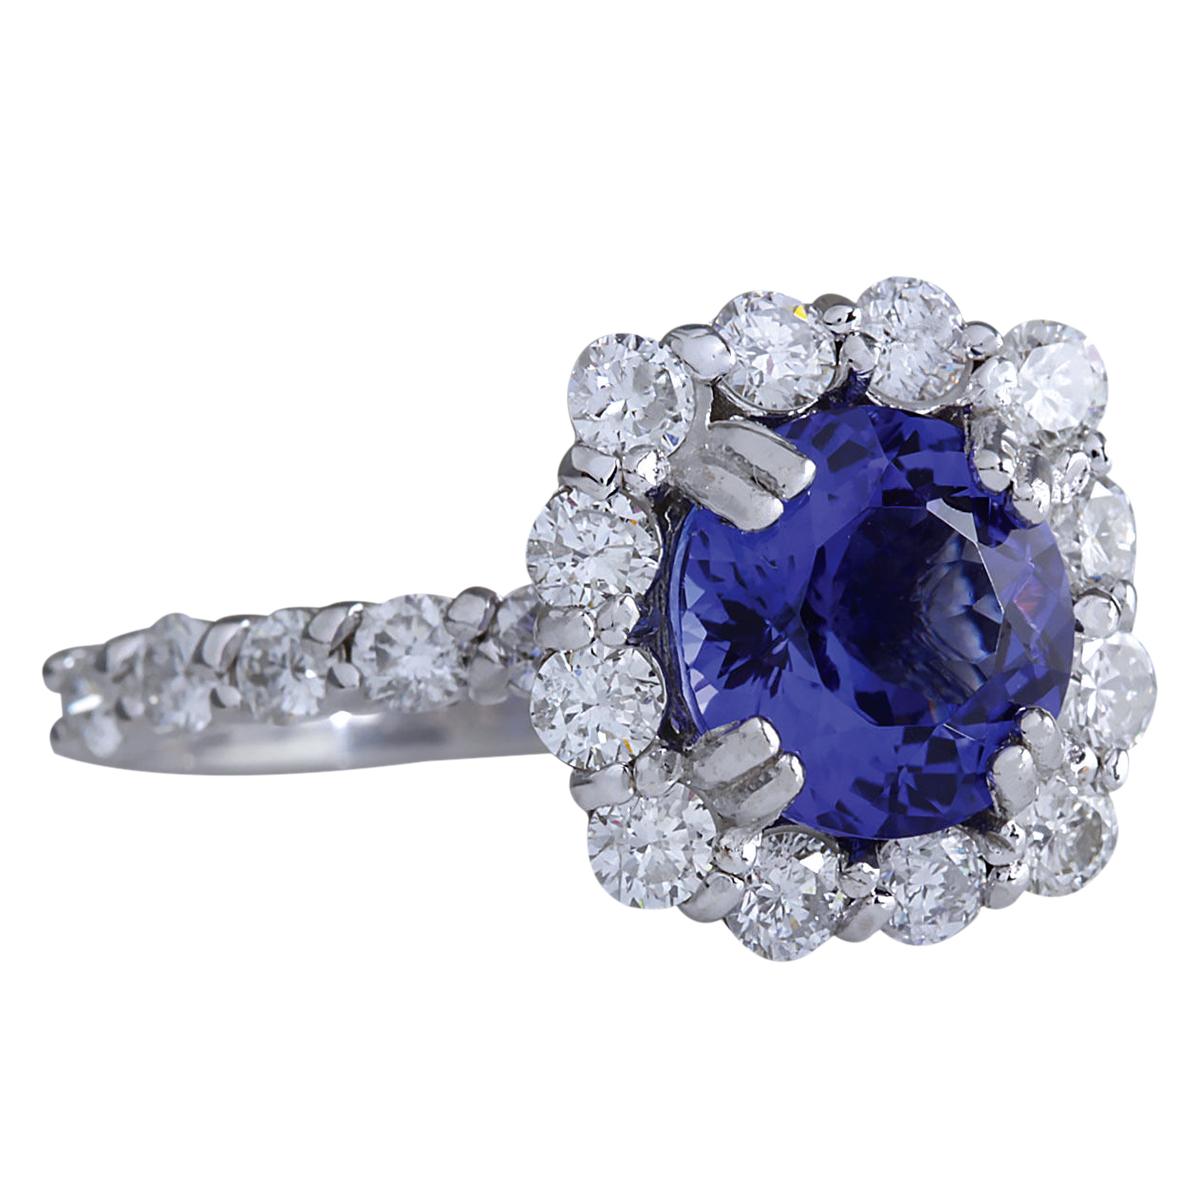 Stamped: 14K White Gold
Total Ring Weight: 4.5 Grams
Total Natural Tanzanite Weight is 2.70 Carat (Measures: 8.50x8.50 mm)
Color: Blue
Total Natural Diamond Weight is 1.42 Carat
Color: F-G, Clarity: VS2-SI1
Face Measures: 13.20x13.20 mm
Sku: